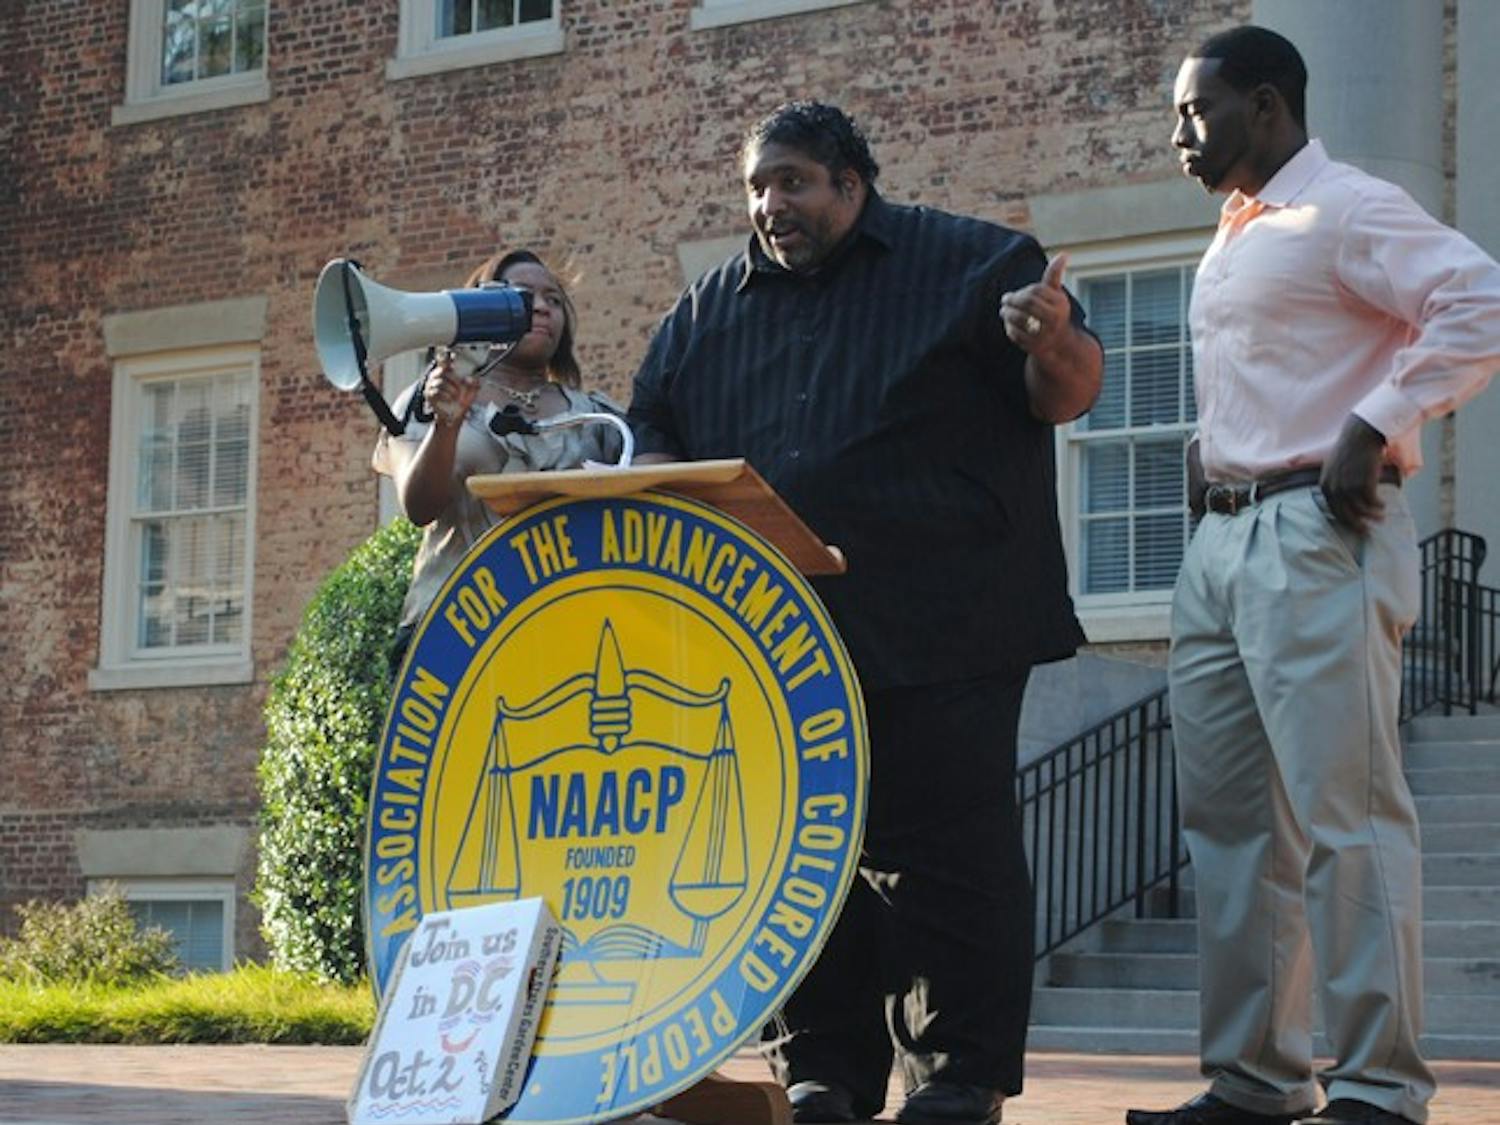 North Carolina NAACP President Rev. William Barber speaks to NAACP supporters outside of South Building on Tuesday evening.